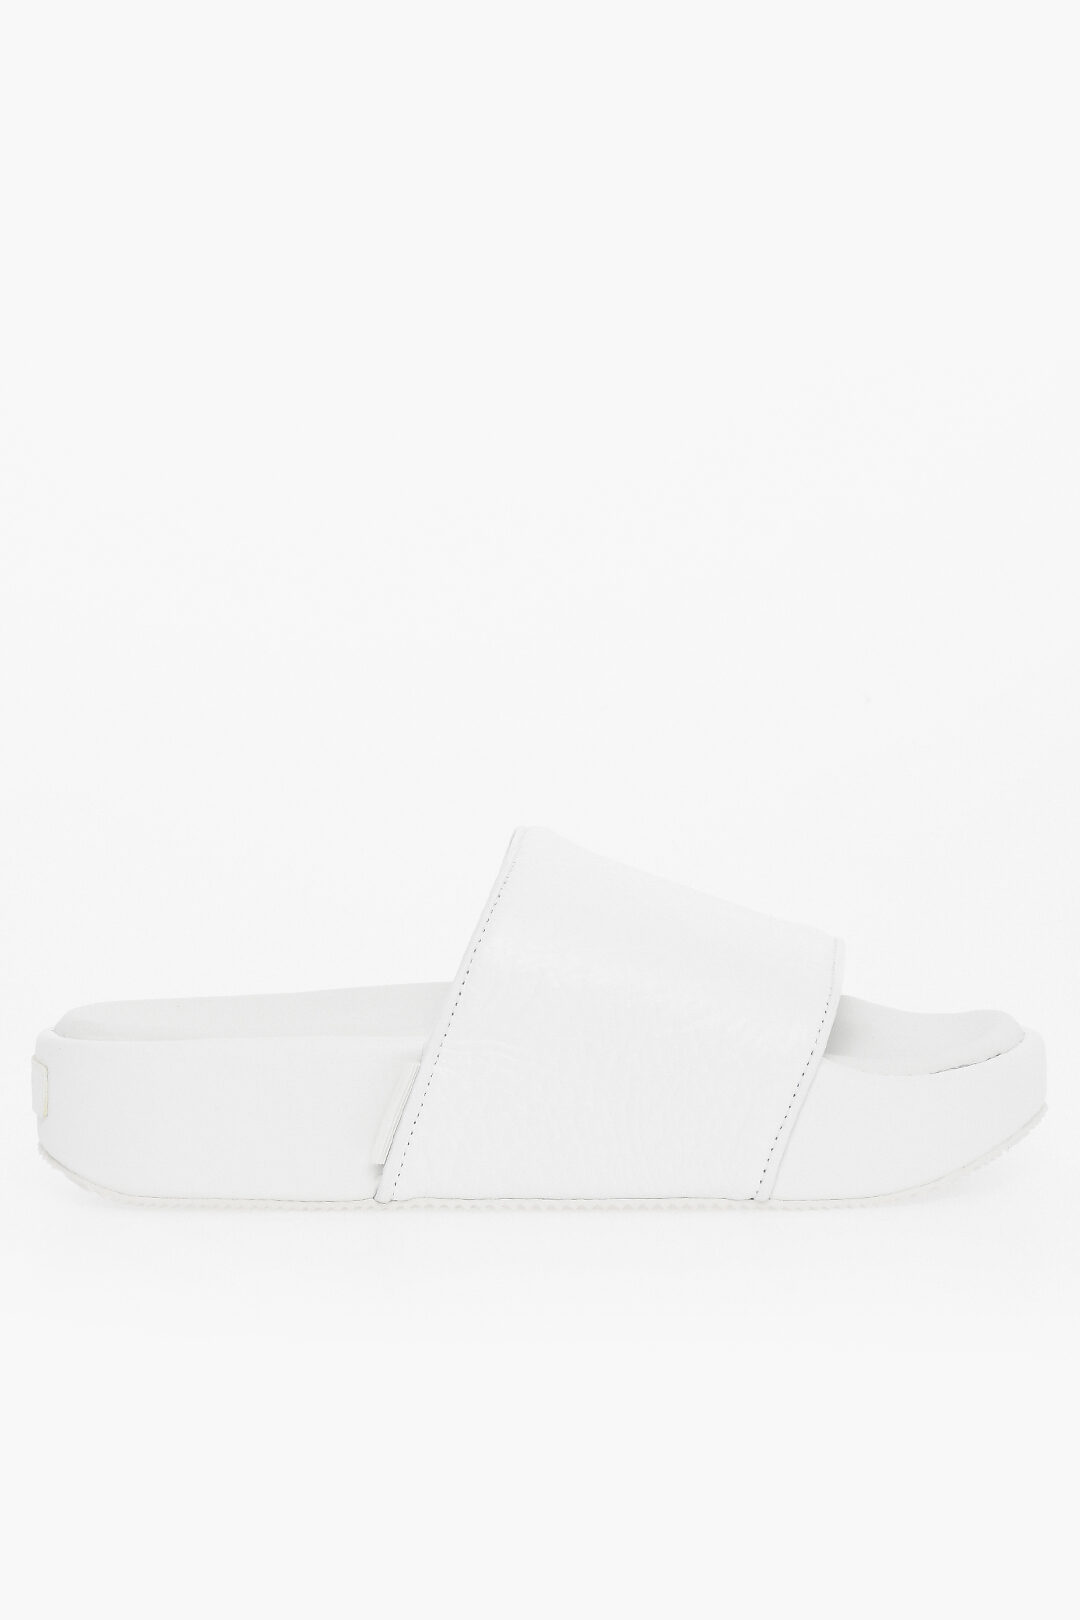 Y-3 by Yohji Yamamoto Solid Color Leather Slides with Platform 4.5cm ...